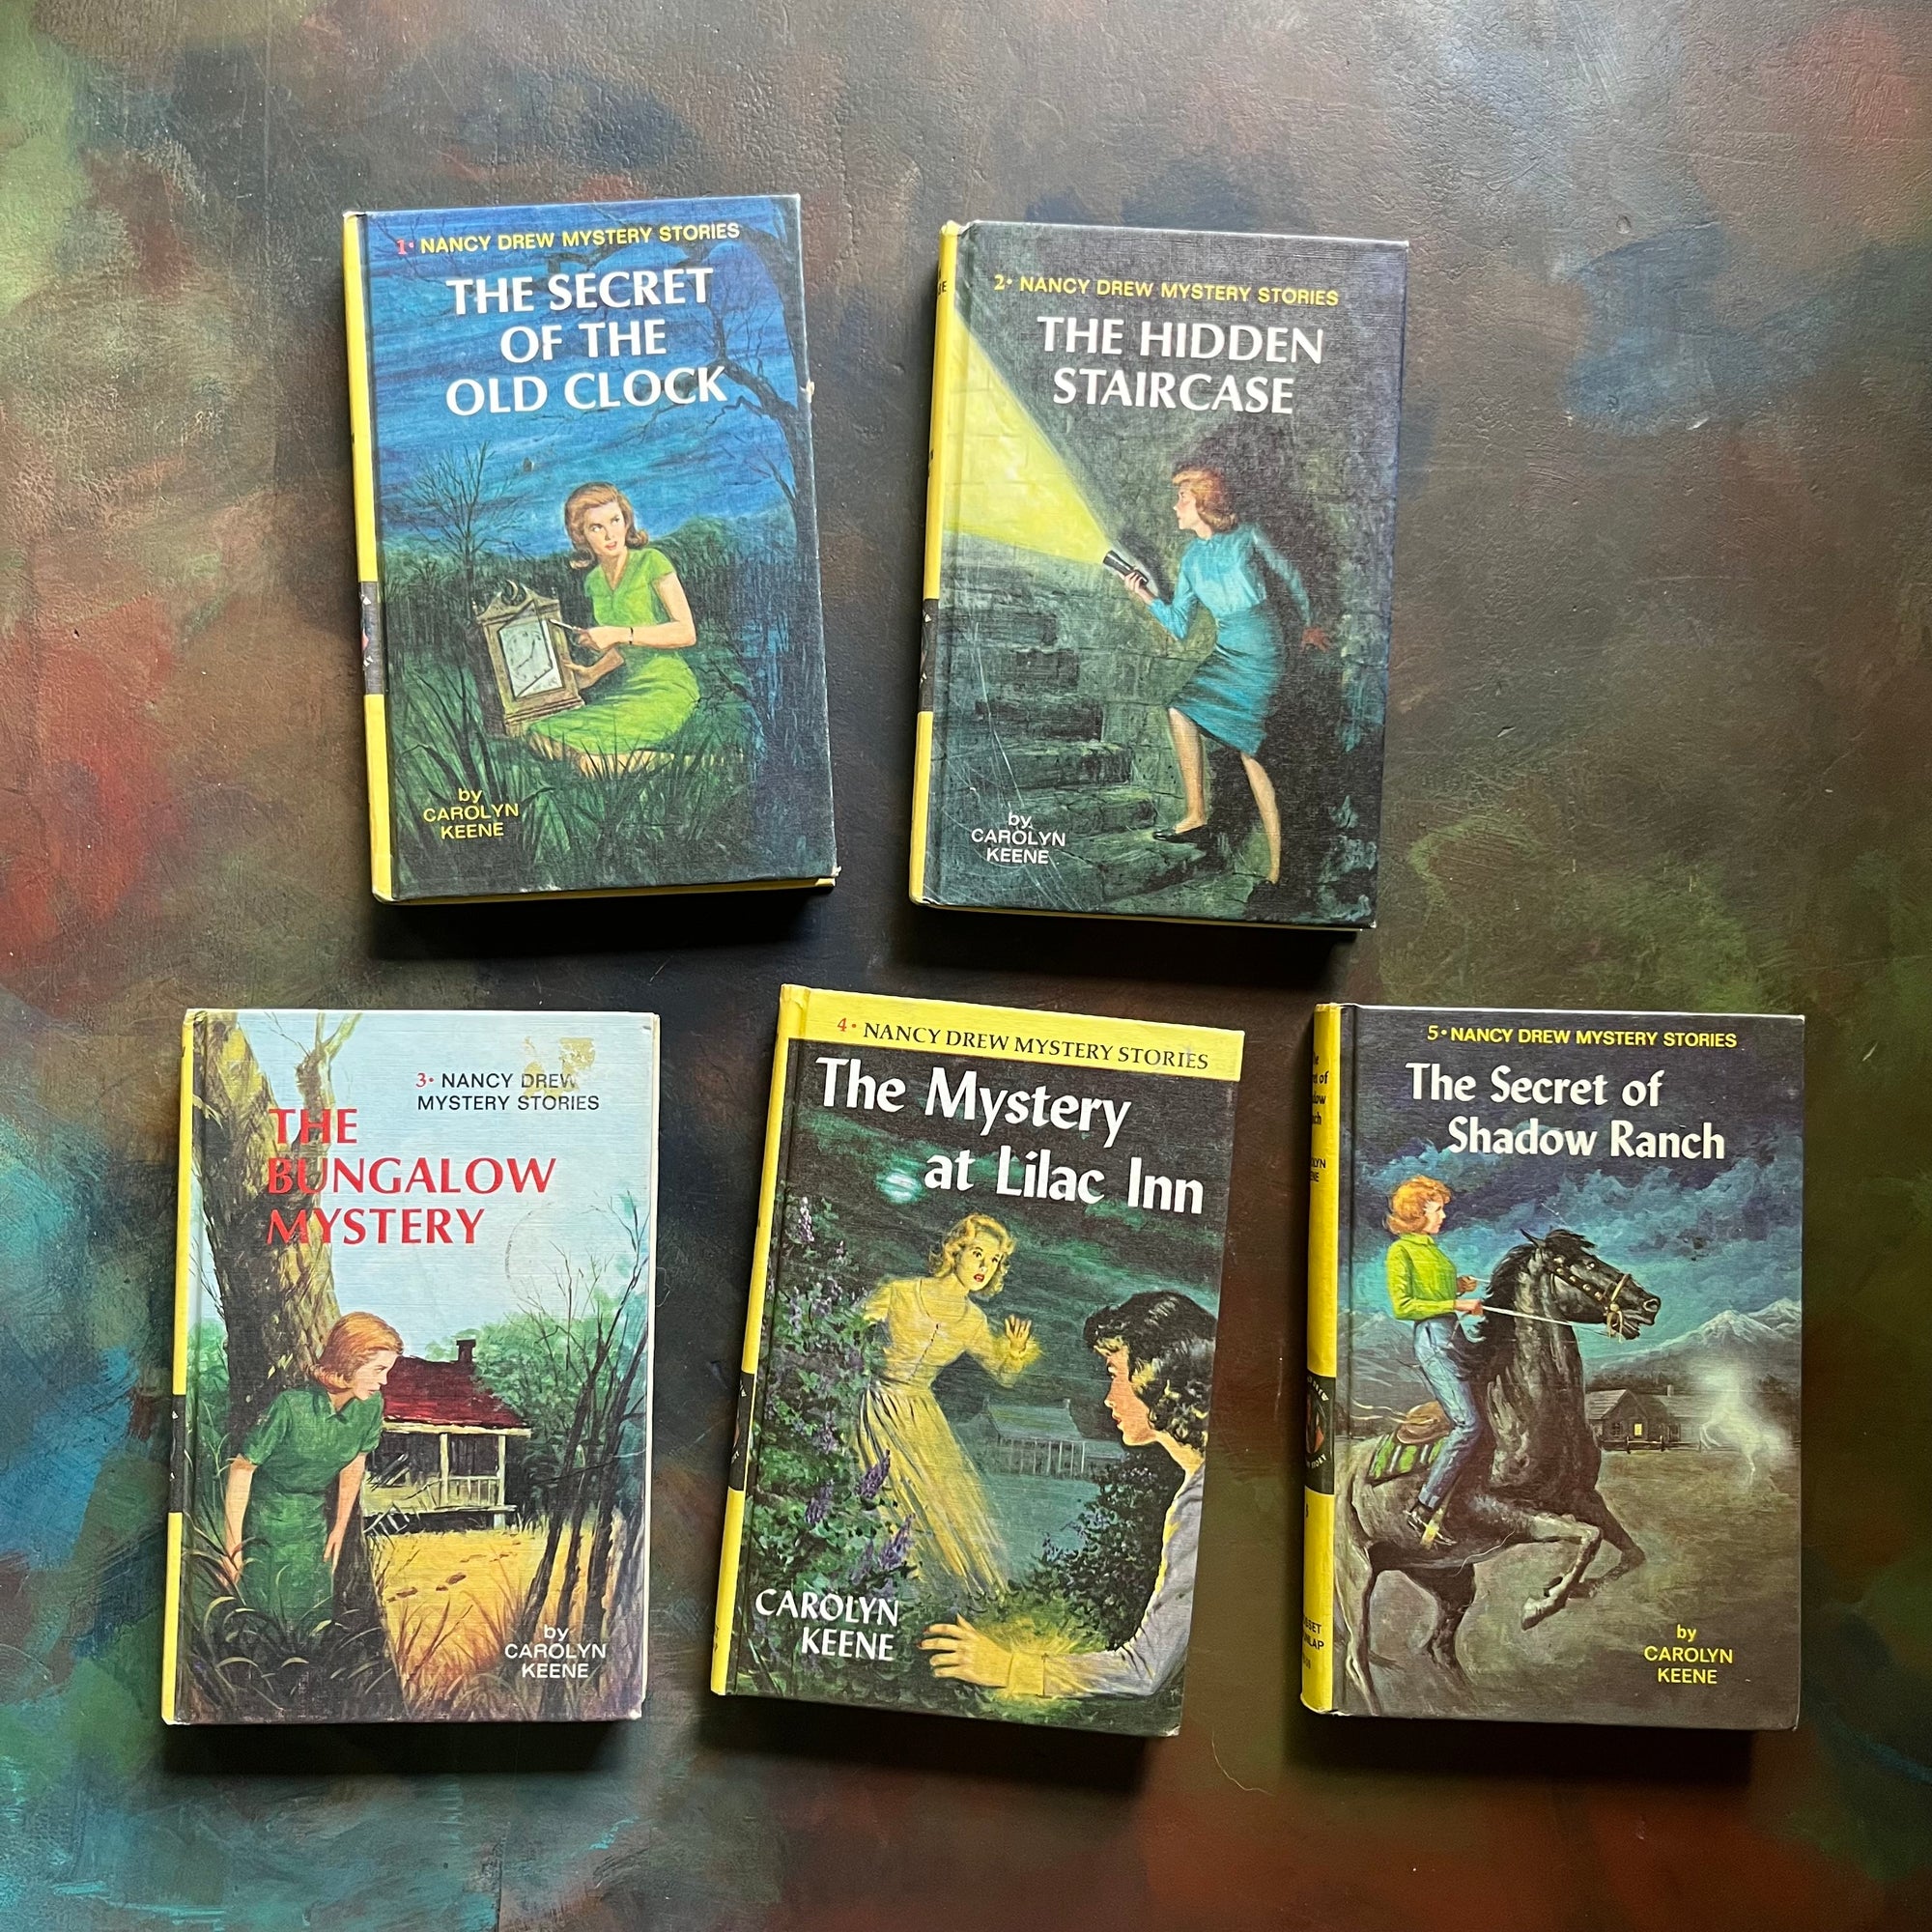 Nancy Drew Mystery Stories Starter Book Set Volumes 1-5 written by Carolyn Keene-vintage mystery books for girls-view of the front covers